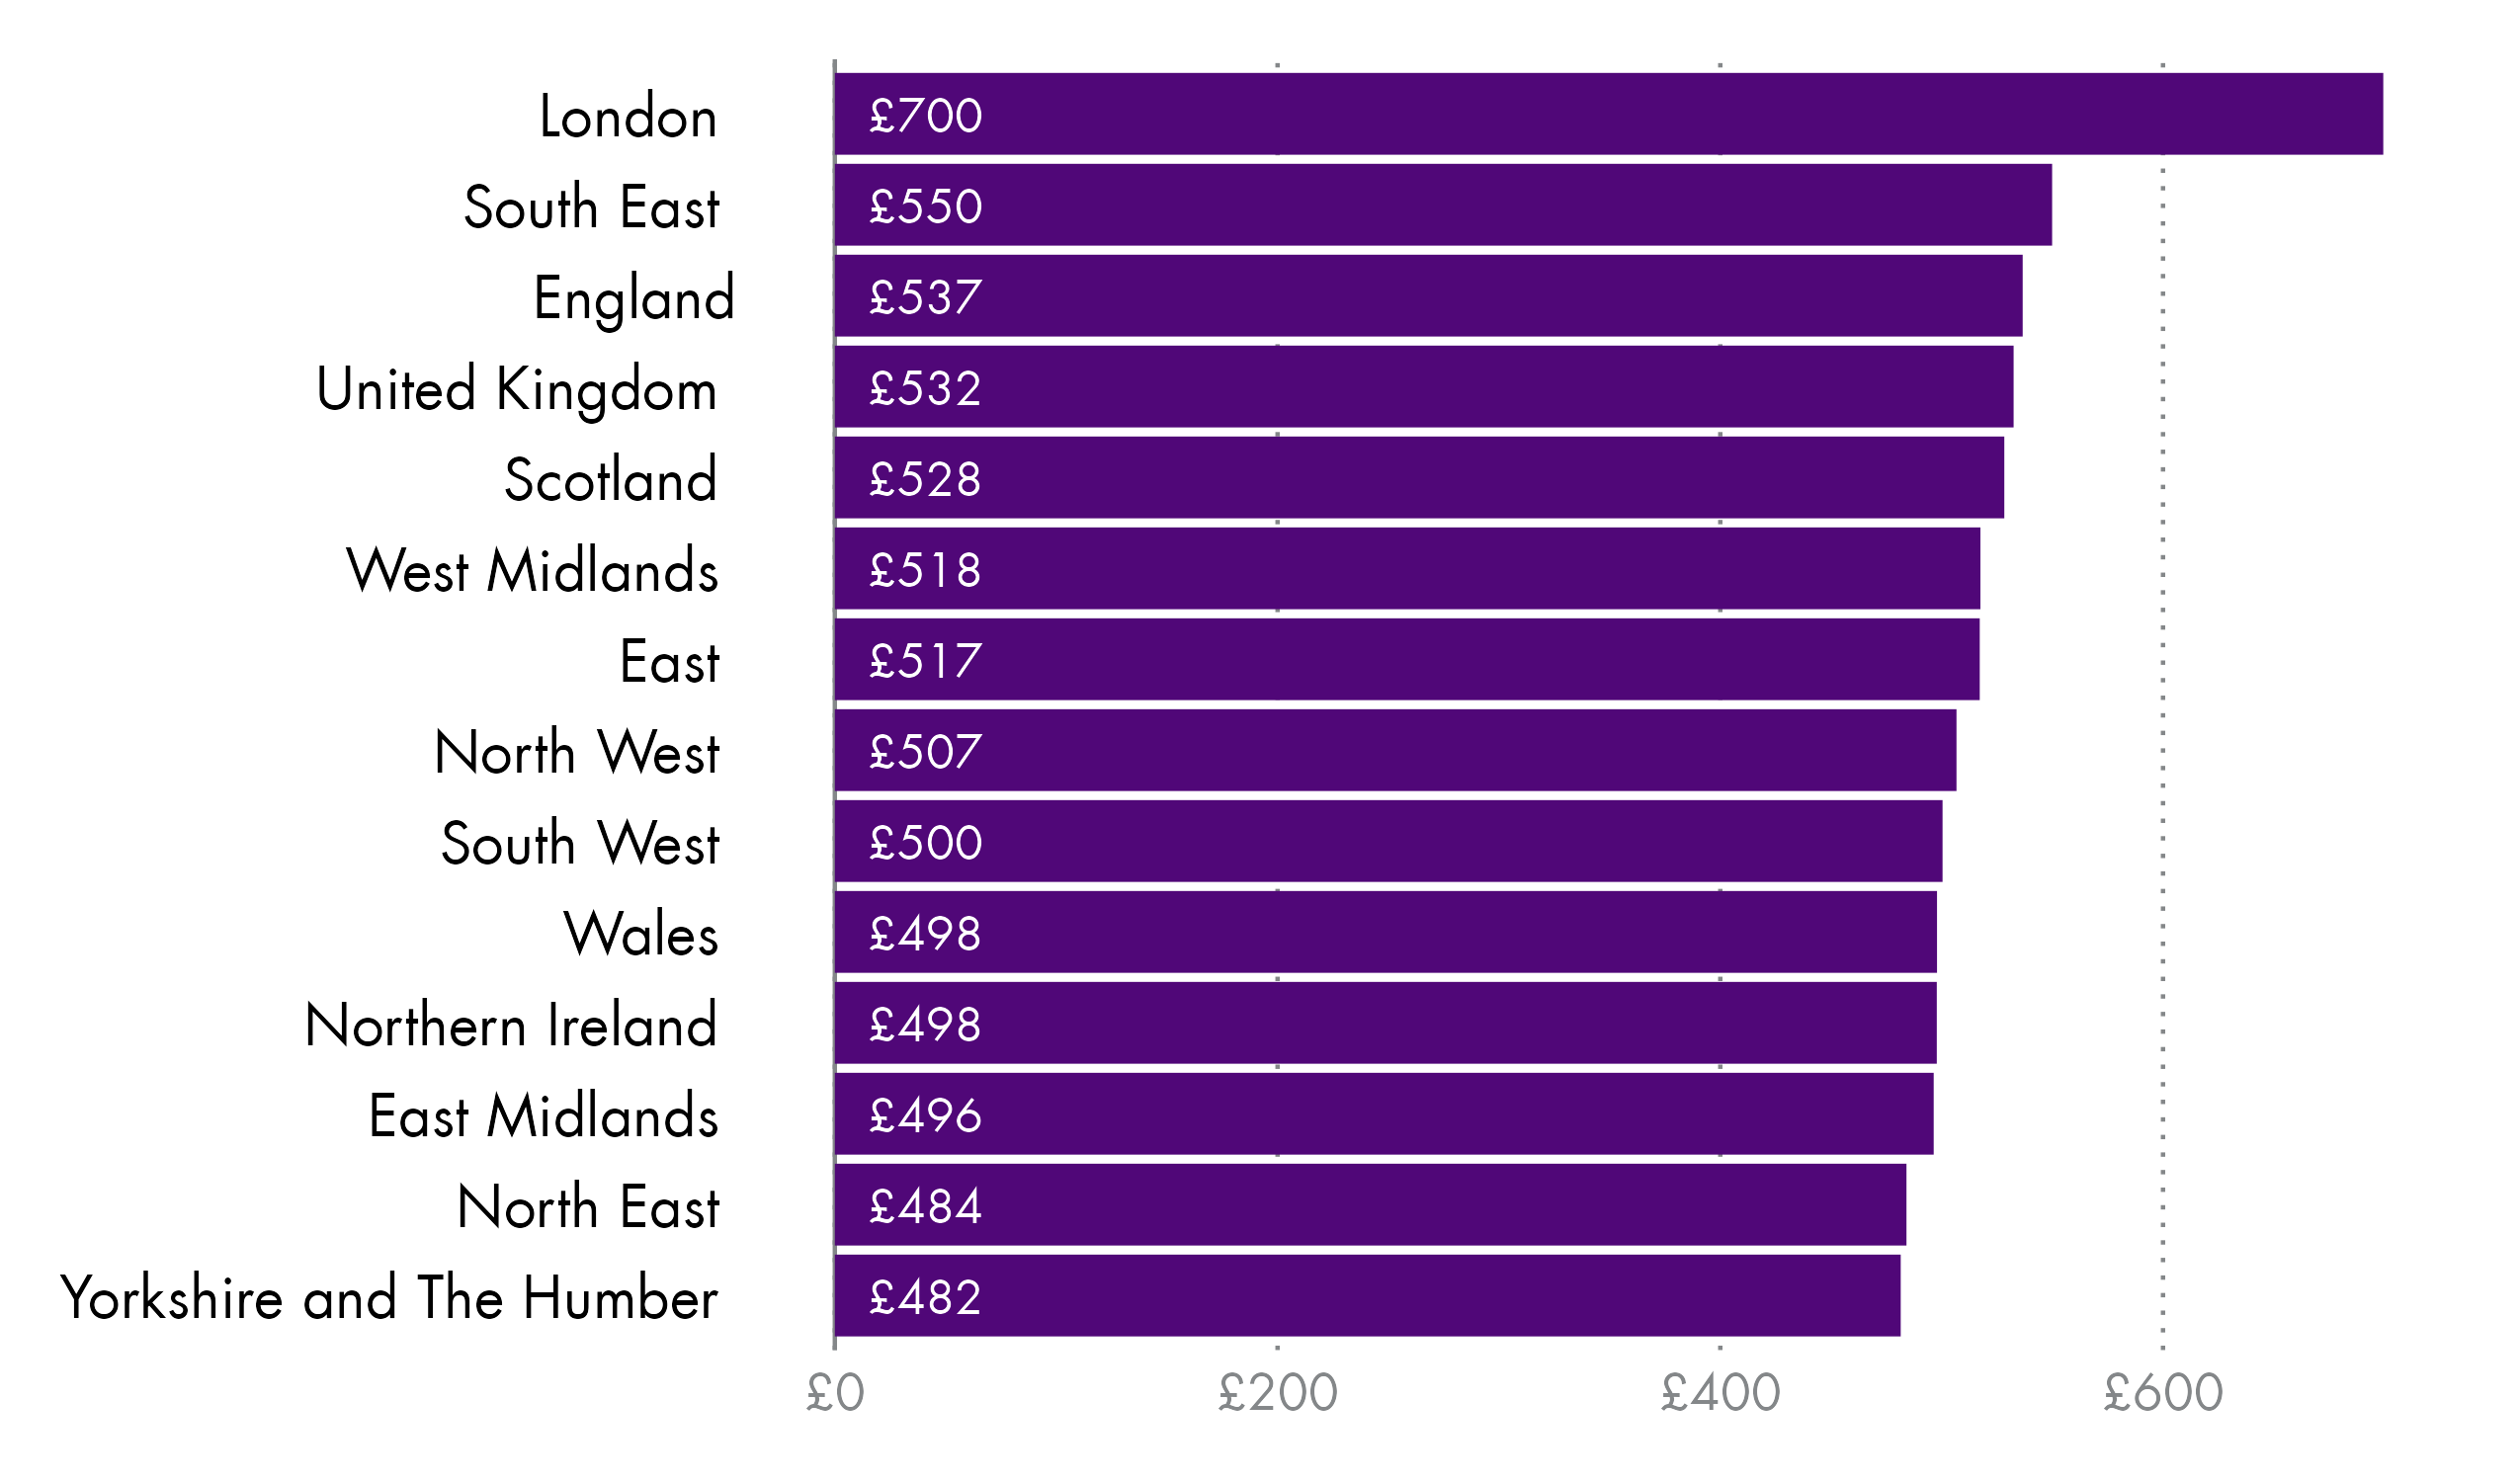 A horizontal bar chart showing the median gross weekly pay for all employees by nations and regions of the UK ranked from highest to lowest.